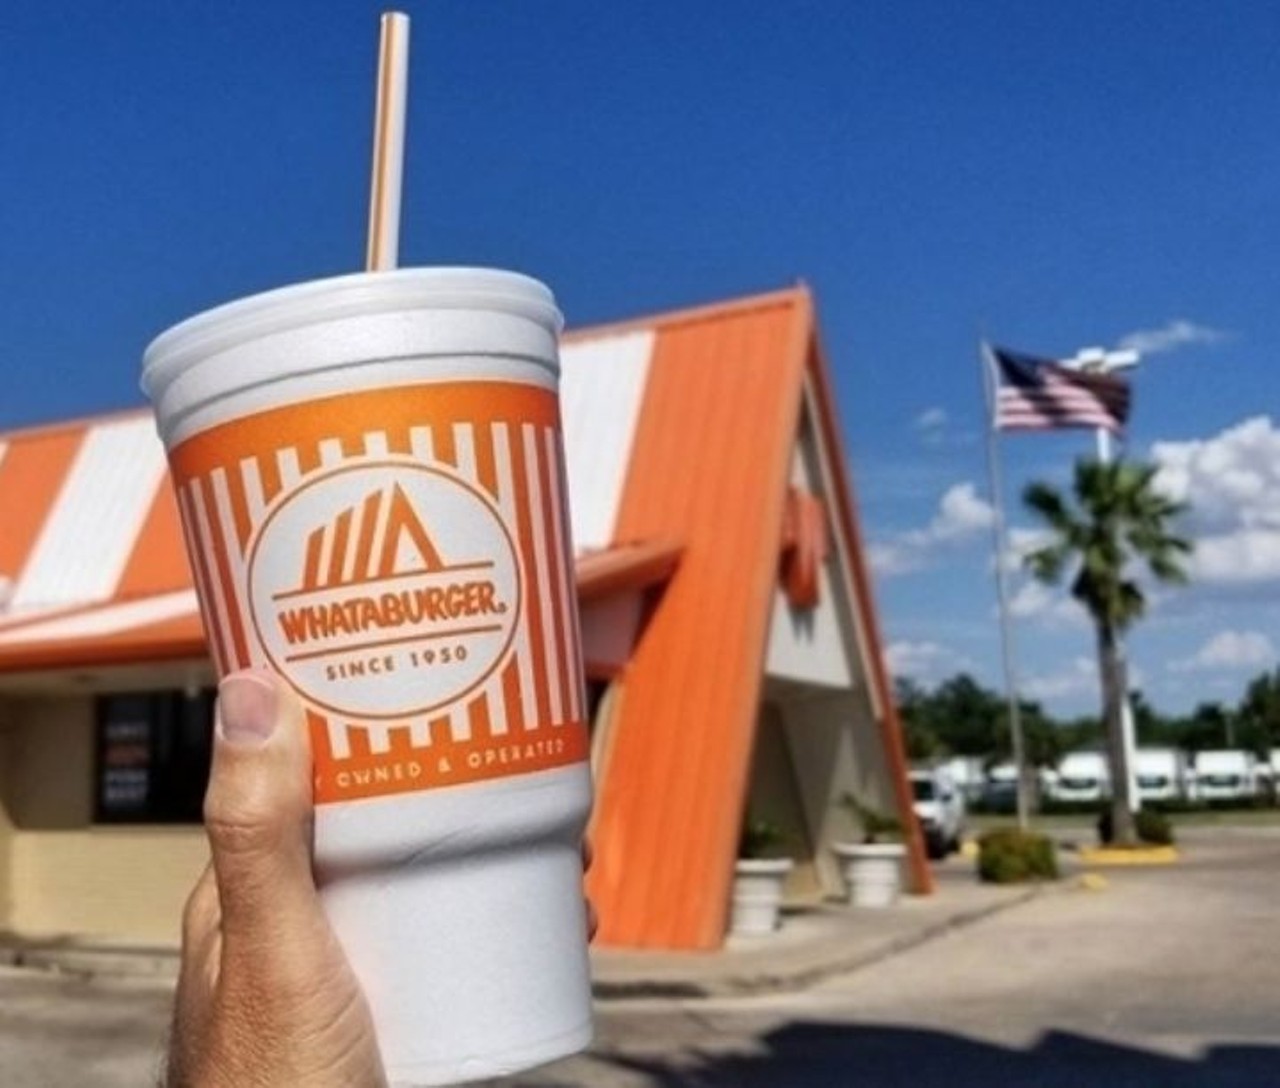 Whataburger
This place specializes in hamburgers &#151; you're shocked, I know &#151; but, they also serve eggs for breakfast and chicken sandwiches for lunch. The fare may seem standard, but Whataburger succeeds because of its intriguing spicy cheeses. The chain is based in San Antonio, Texas and the closest location to us is in Alabama. 
Photo via Instagram use @whataburger